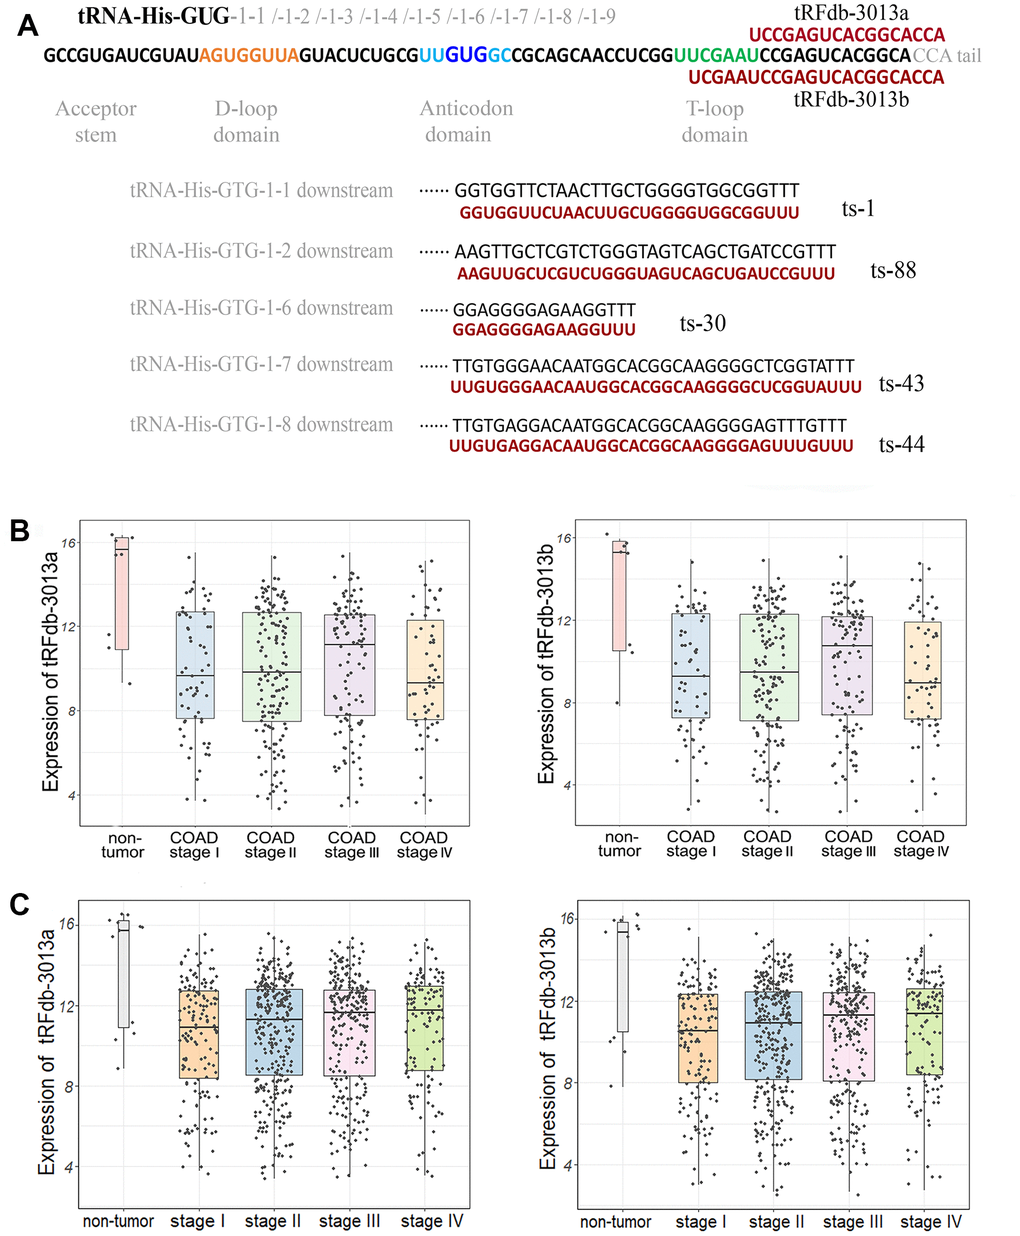 (A) Representative images of the sequence alignments between tsRNAs and its tRNA sources. (B) The scatter plus box plots of tRFdb-3013a and tRFdb-3013b expression (log2TPM) between non-tumor controls and colon adenocarcinomas (COAD) with four stages (both P C) The scatter plus box plots of tRFdb-3013a and tRFdb-3013b expression (log2TPM) between non-tumor controls and colon plus rectal adenocarcinomas (COAD-READ) with four stages (both P 